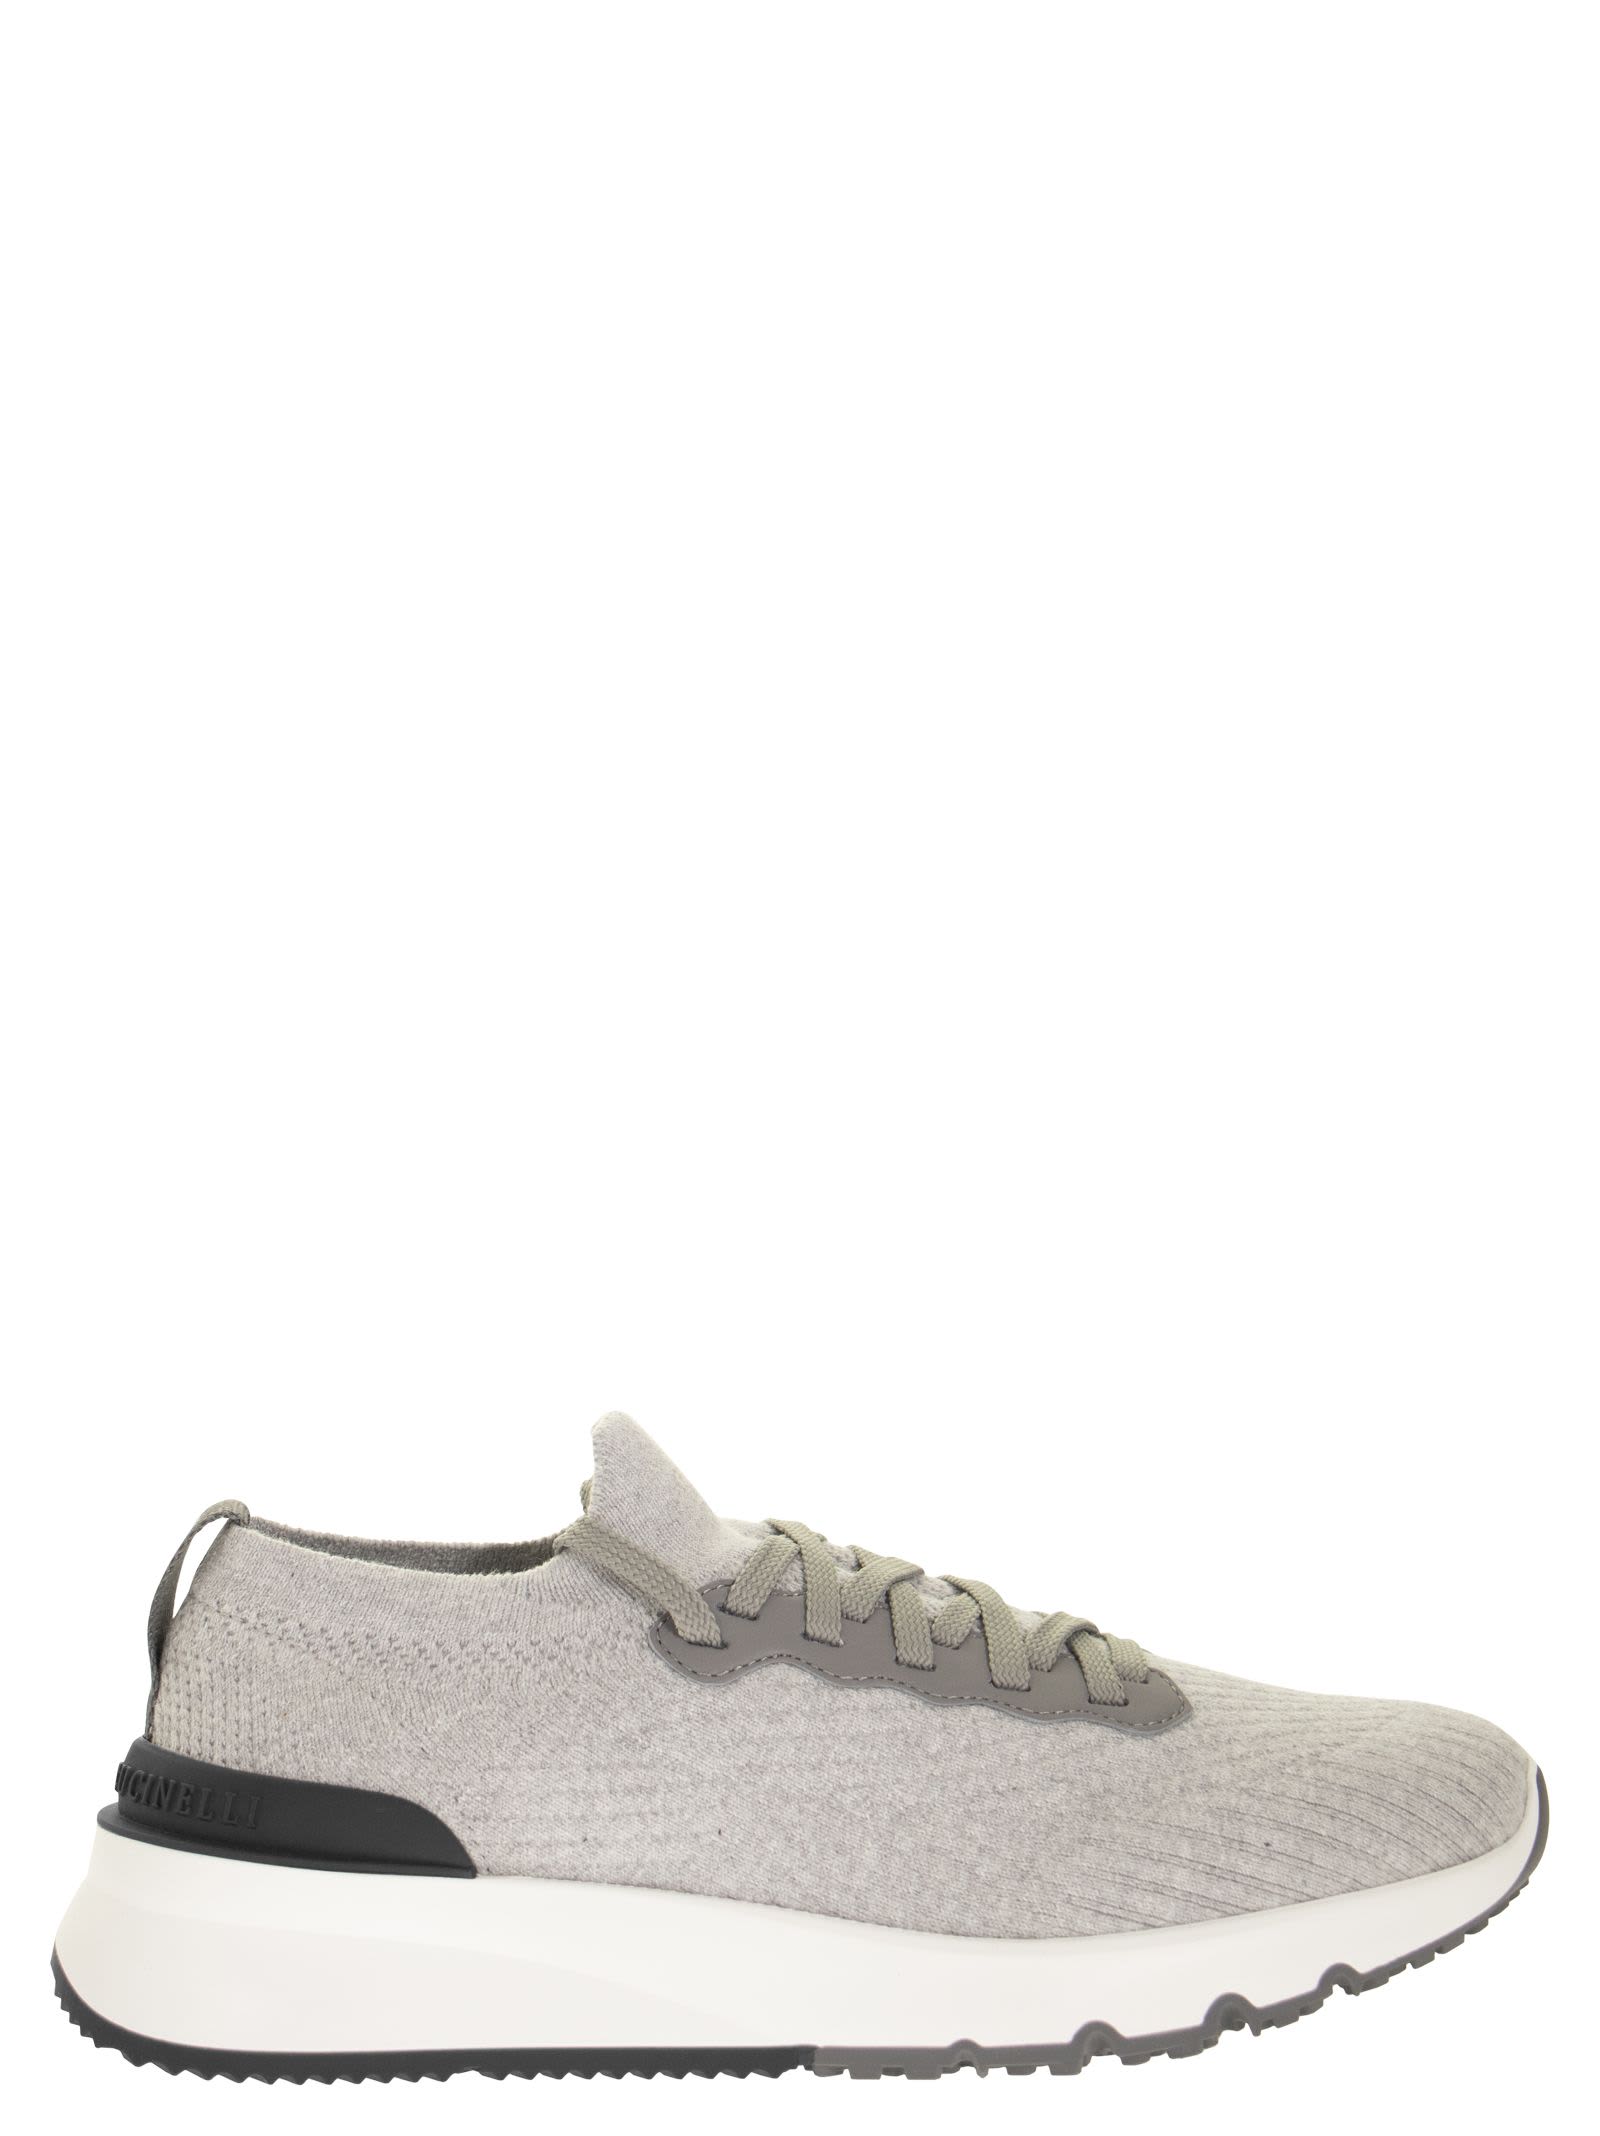 Brunello Cucinelli Runners In Cotton Knit And Semi-glossy Calf Leather